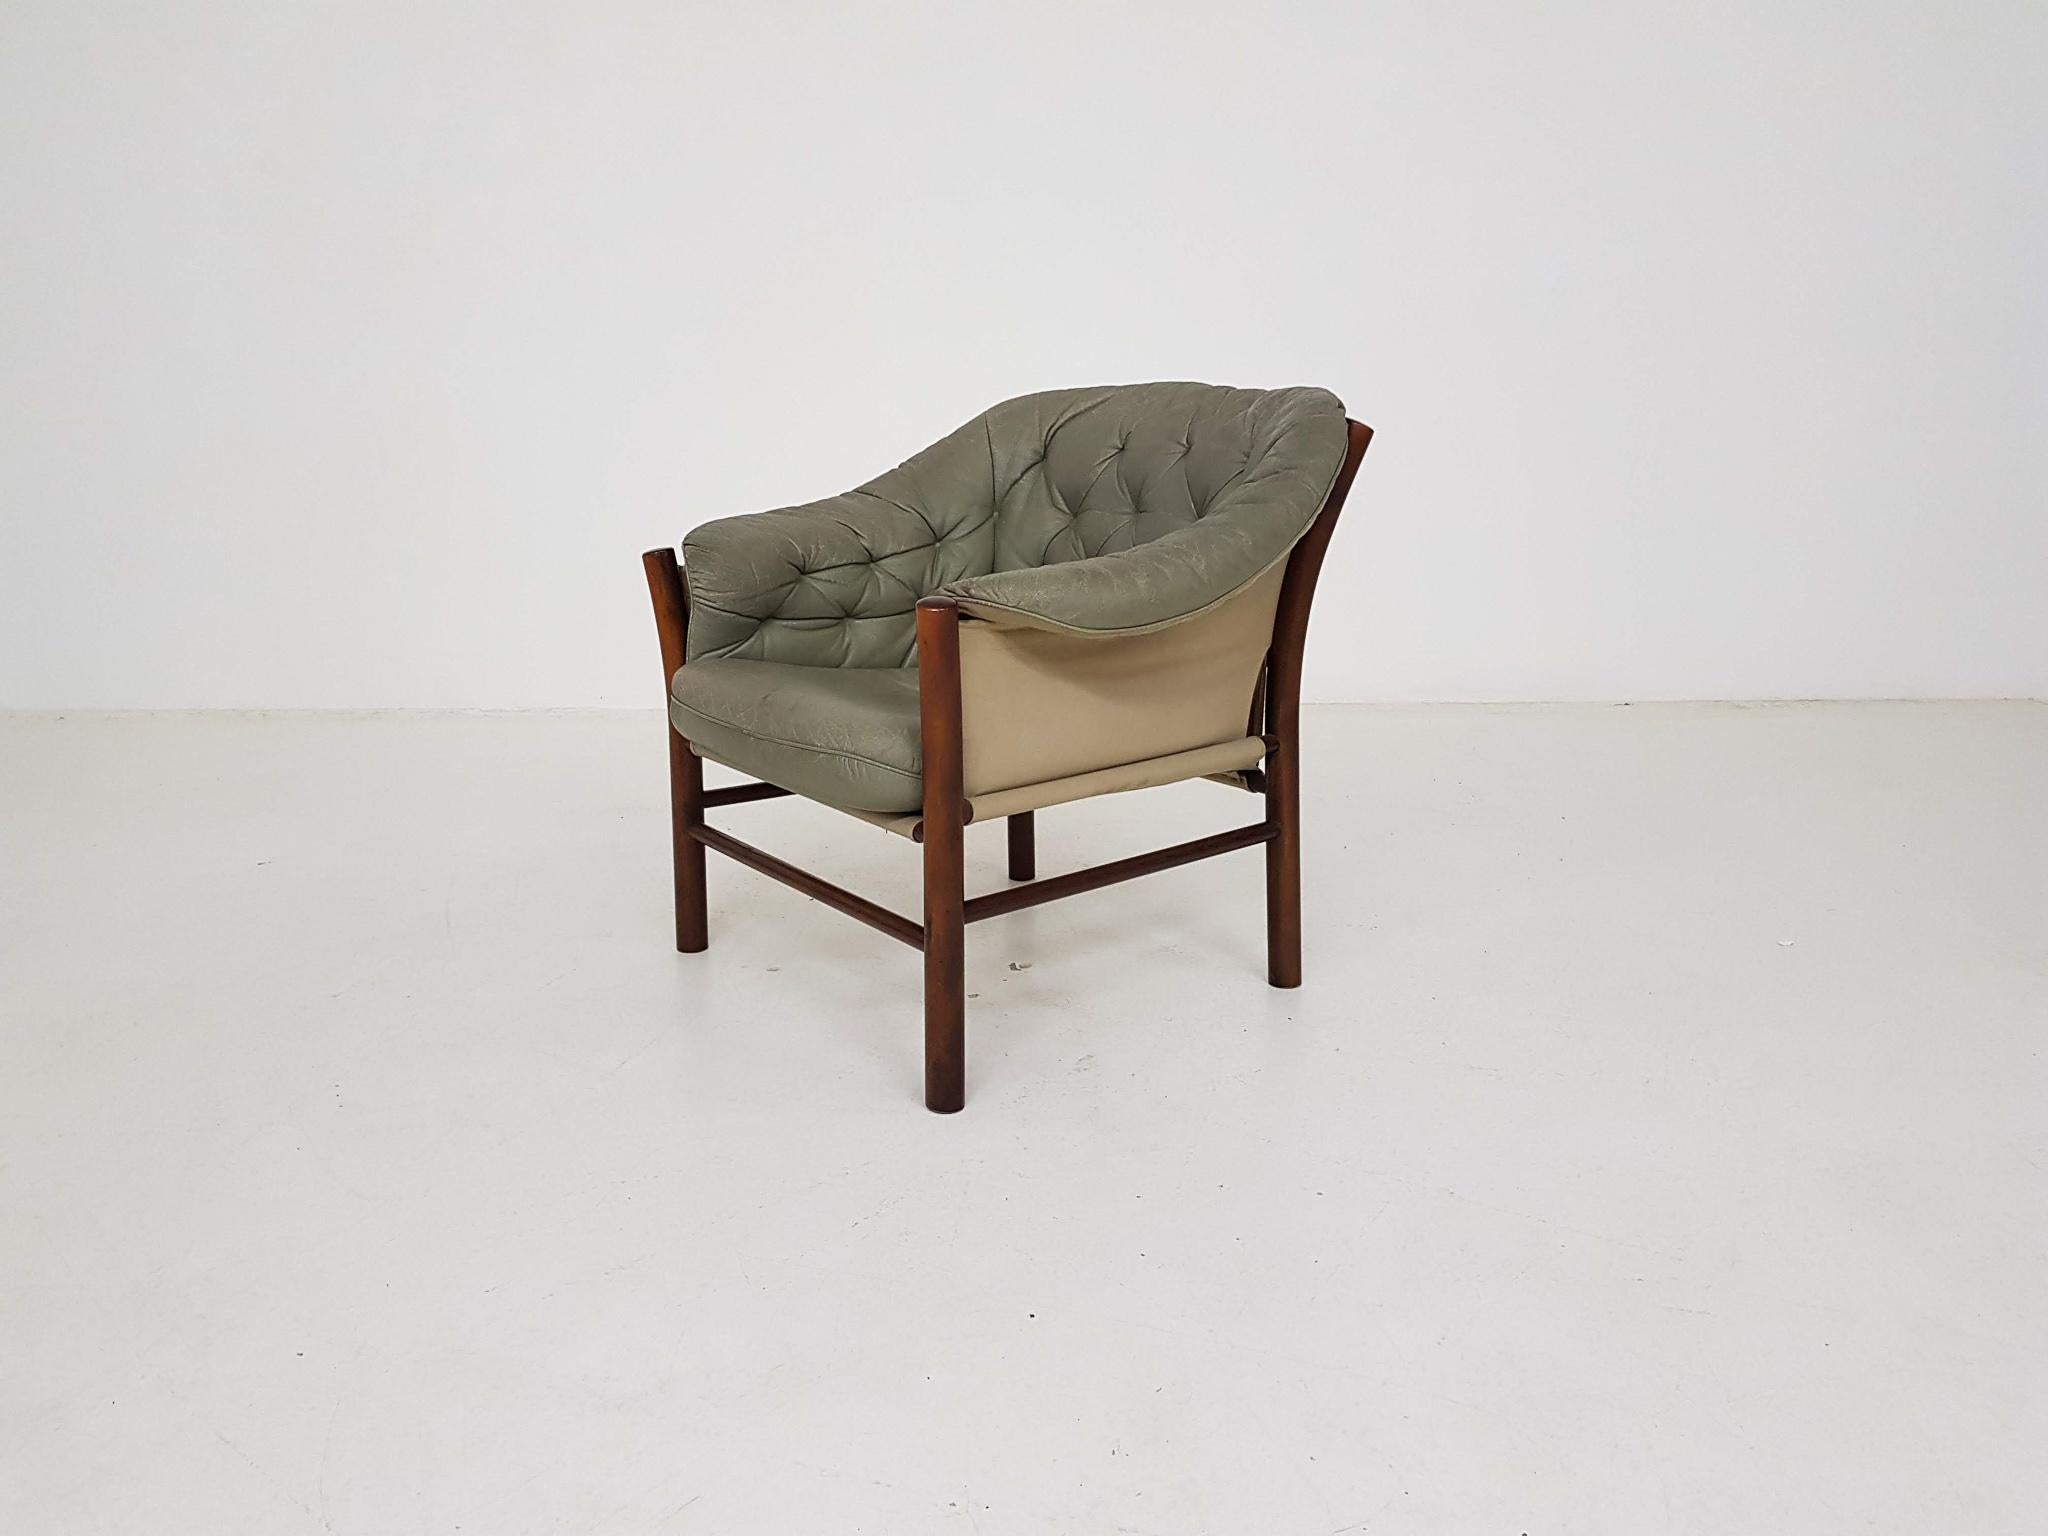 Vintage green leather lounge chair by Göte Möbel or G-Möbel , made and designed in Sweden in the 1970s.

This Scandinavian lounge or armchair has a nice wooden frame with thick green leather cushions for great comfort. The cushions are held by